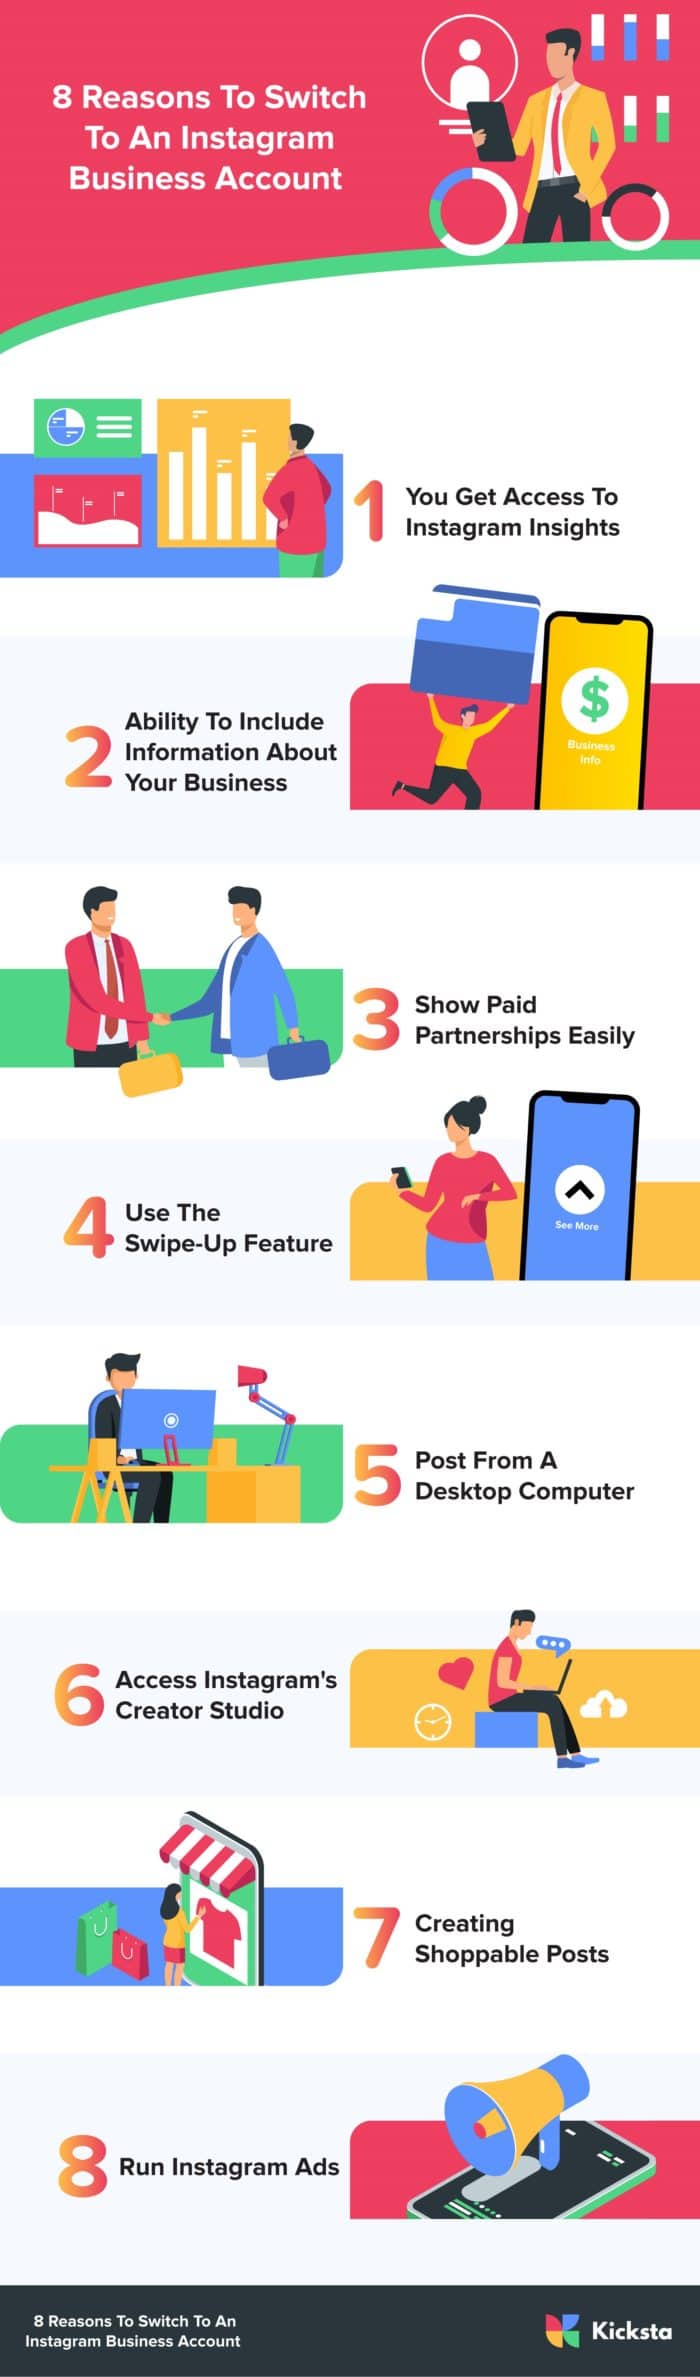 8 Reasons To Switch To An Instagram Business Account Infographic